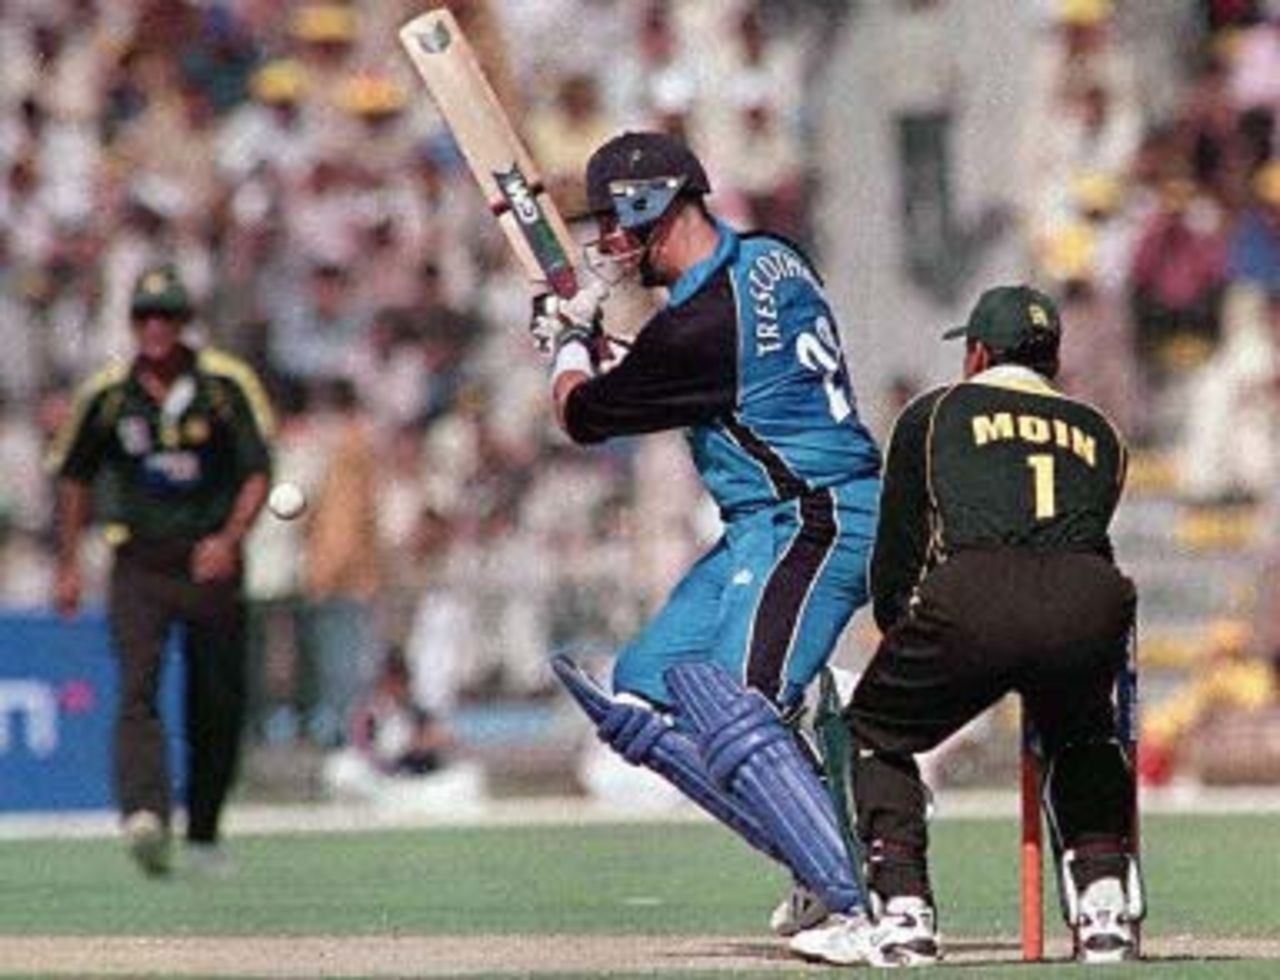 Trescothick flays the ball through the offside as Pakistani skipper Moin Khan watches, England in Pakistan, 2000/01, 2nd One-Day International, Pakistan v England, Gaddafi Stadium, Lahore, 27 October 2000.